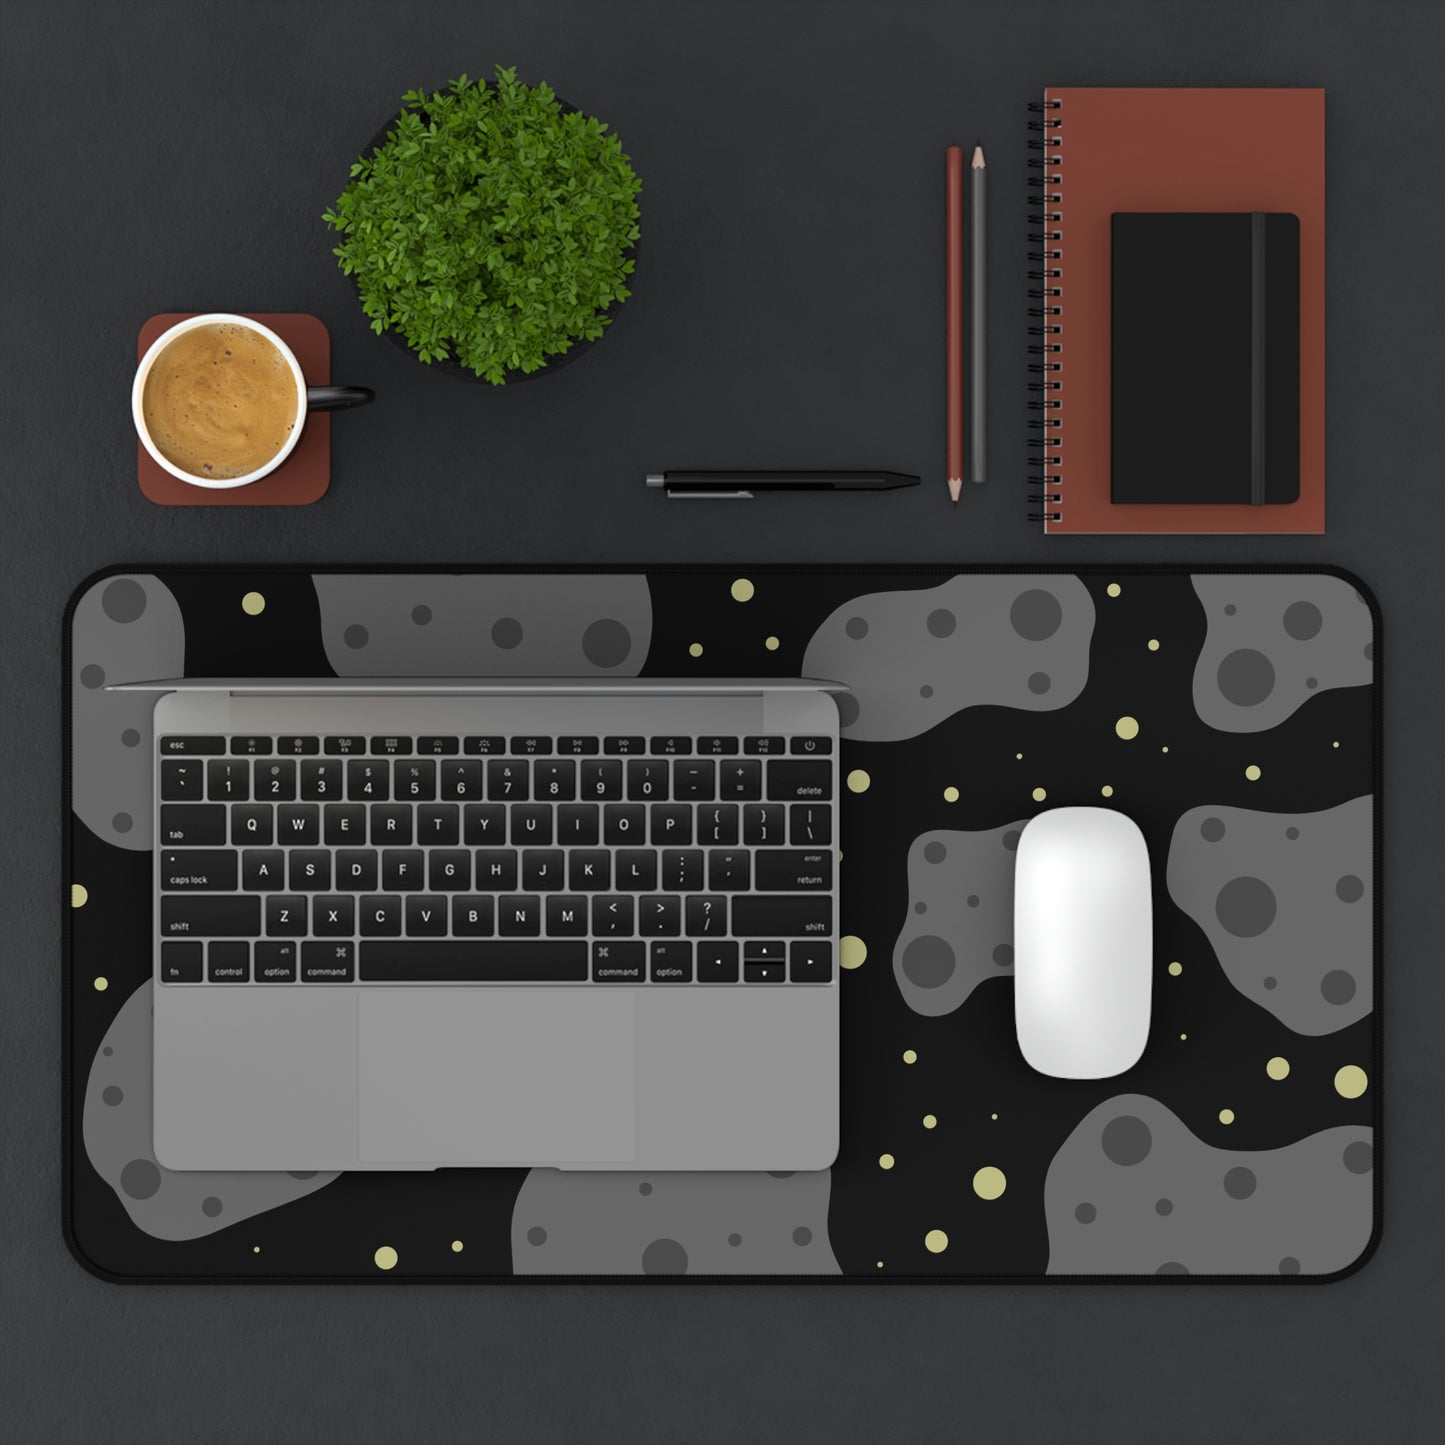 A 12" x 22" desk mat with a black background, gray asteroids, and yellow stars. A laptop and mouse sit on top of it.